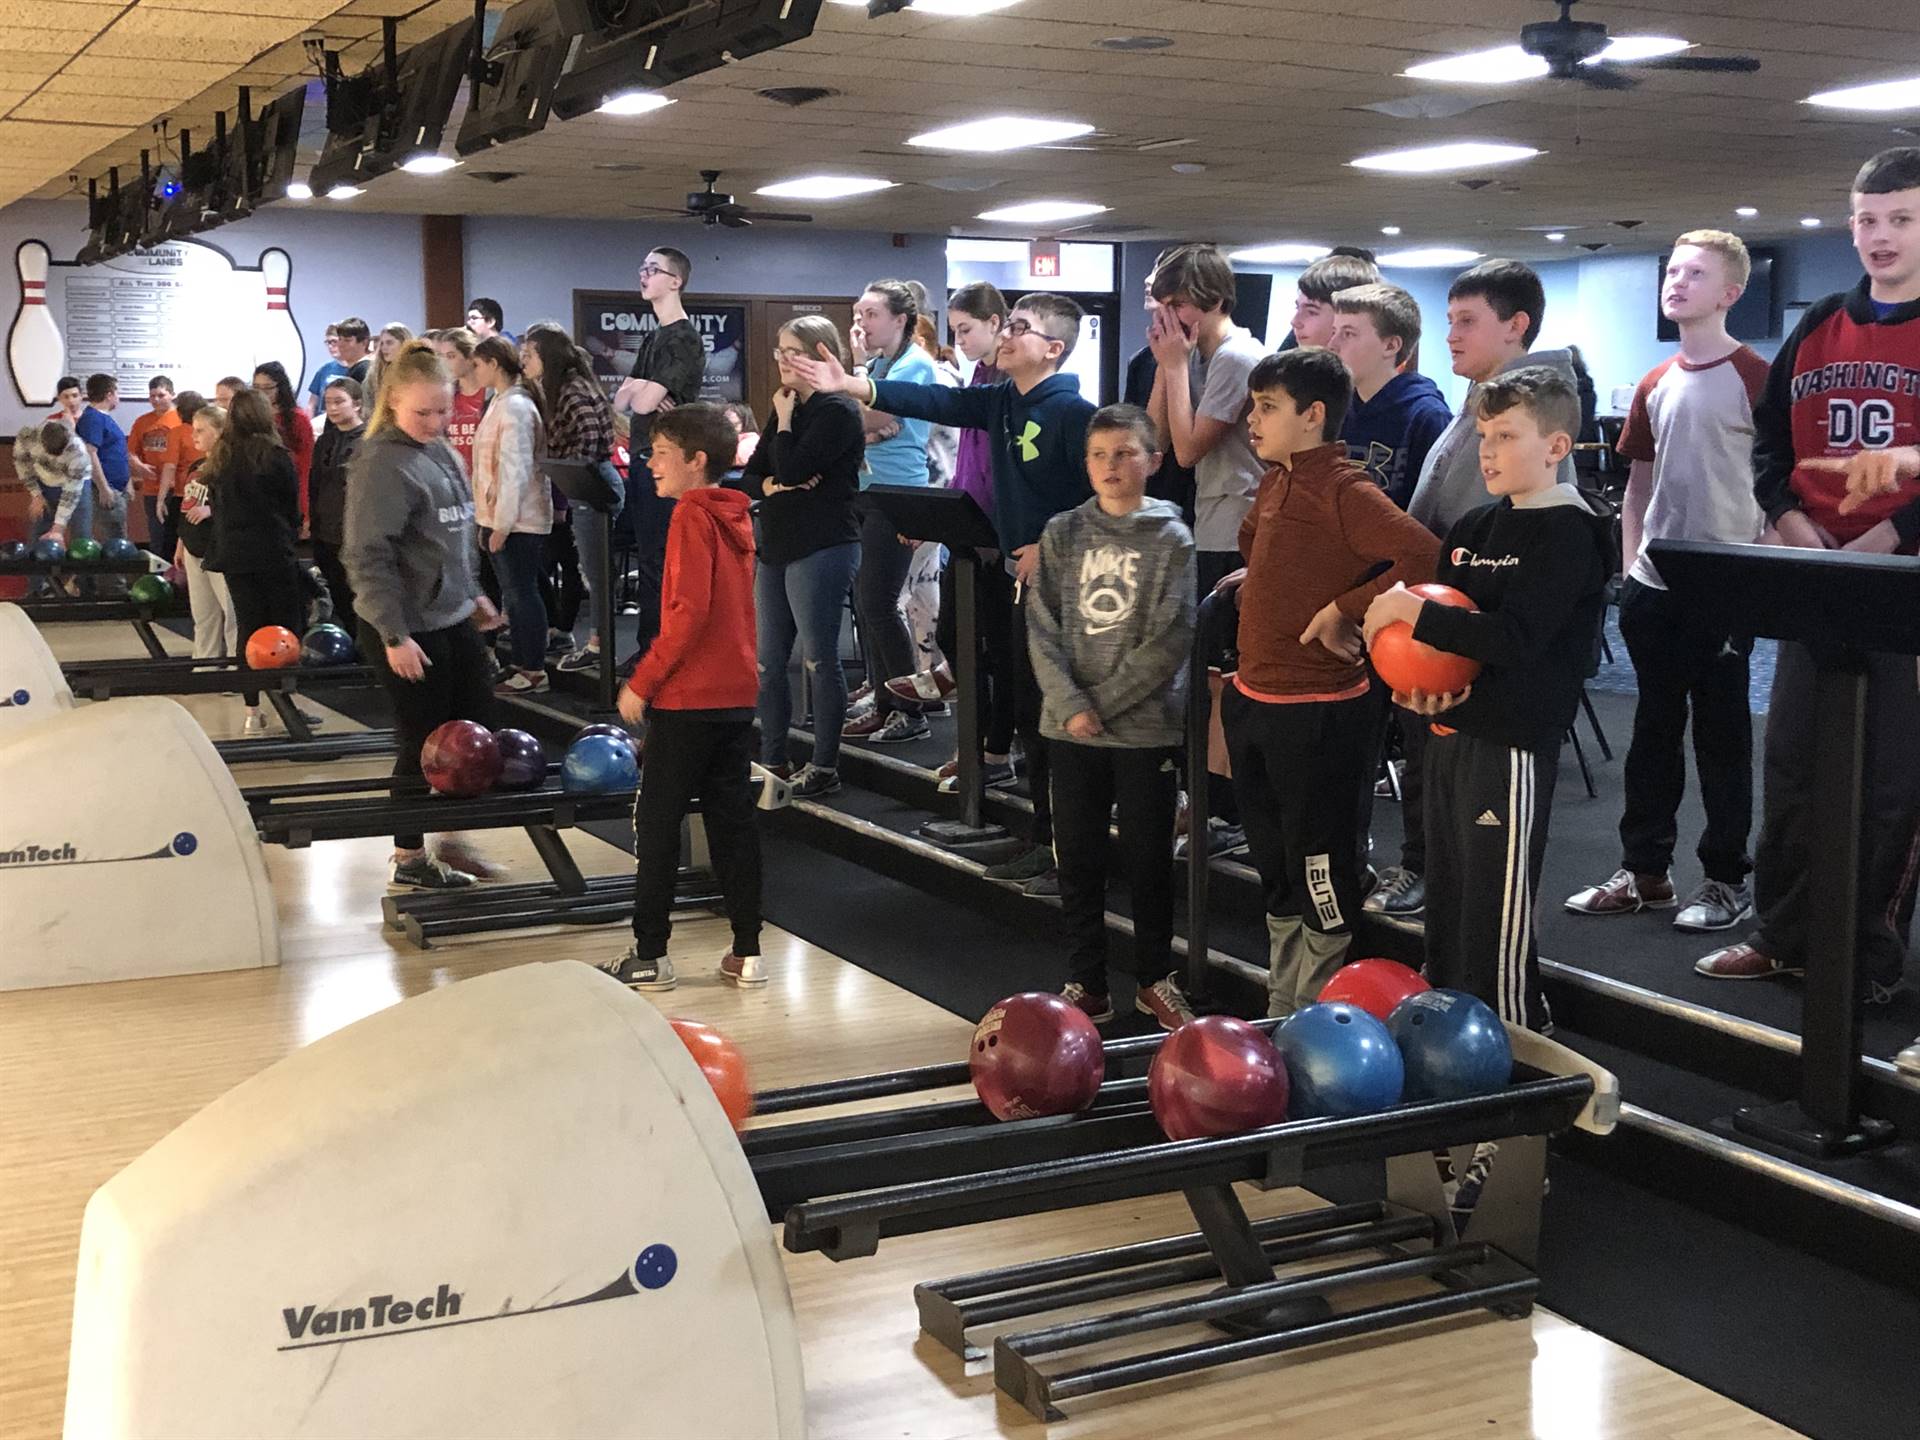 Students Bowling